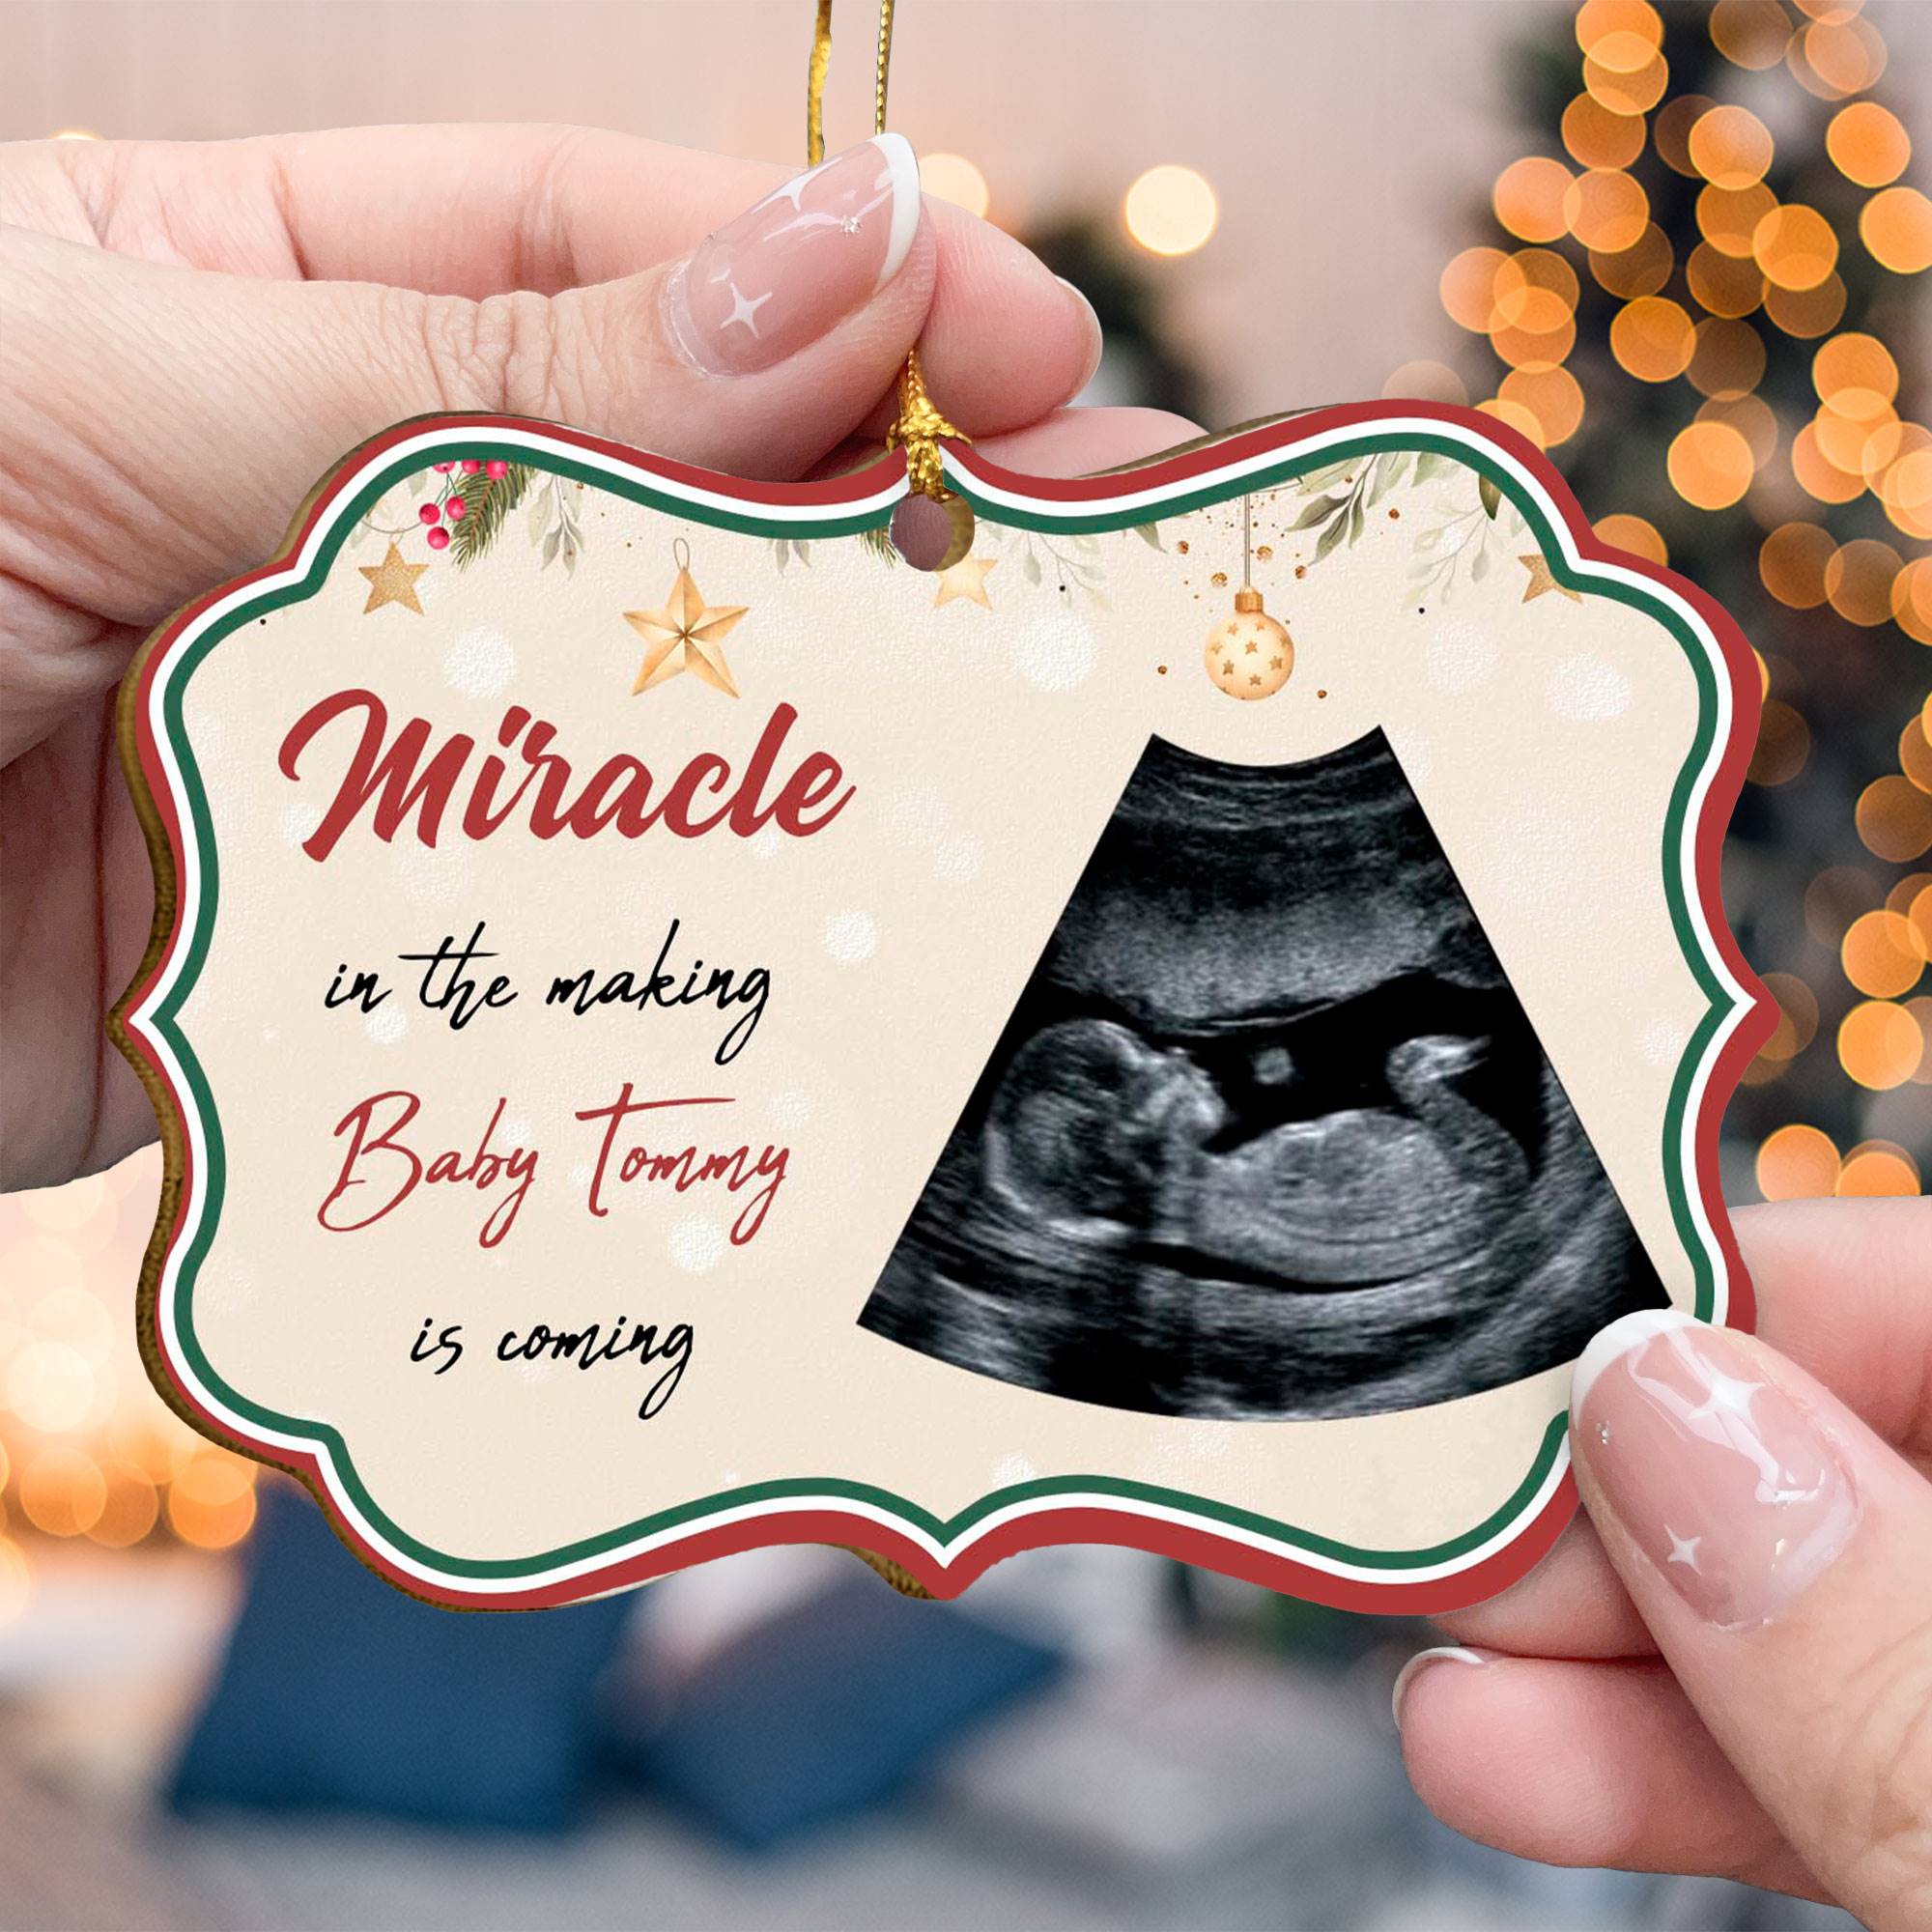 Miracle In The Making Baby Is Coming - Personalized Wooden Card With Pop Out Ornament - Christmas, Pregnancy Announcement Gift For Family Members, Father-To-Be, Grandfather & Grandmother